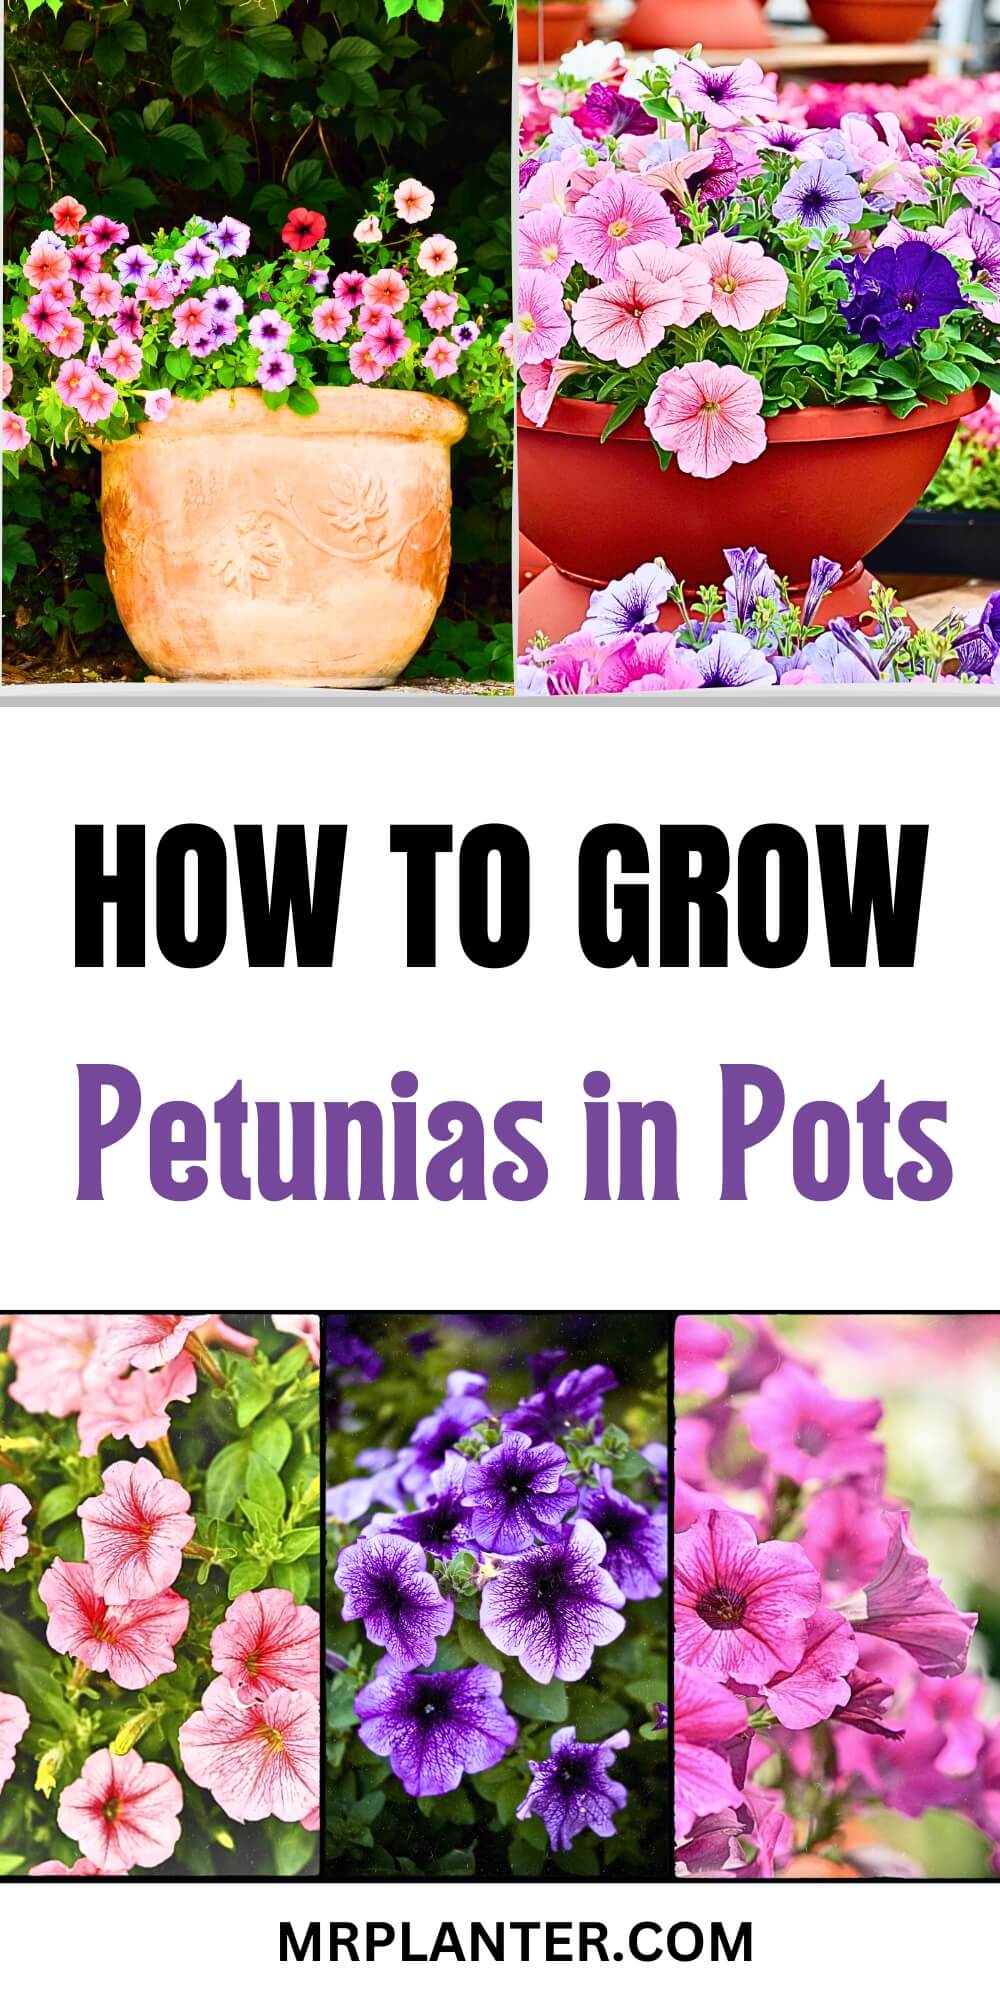 How to Grow Petunias in Pots: Tips and Tricks